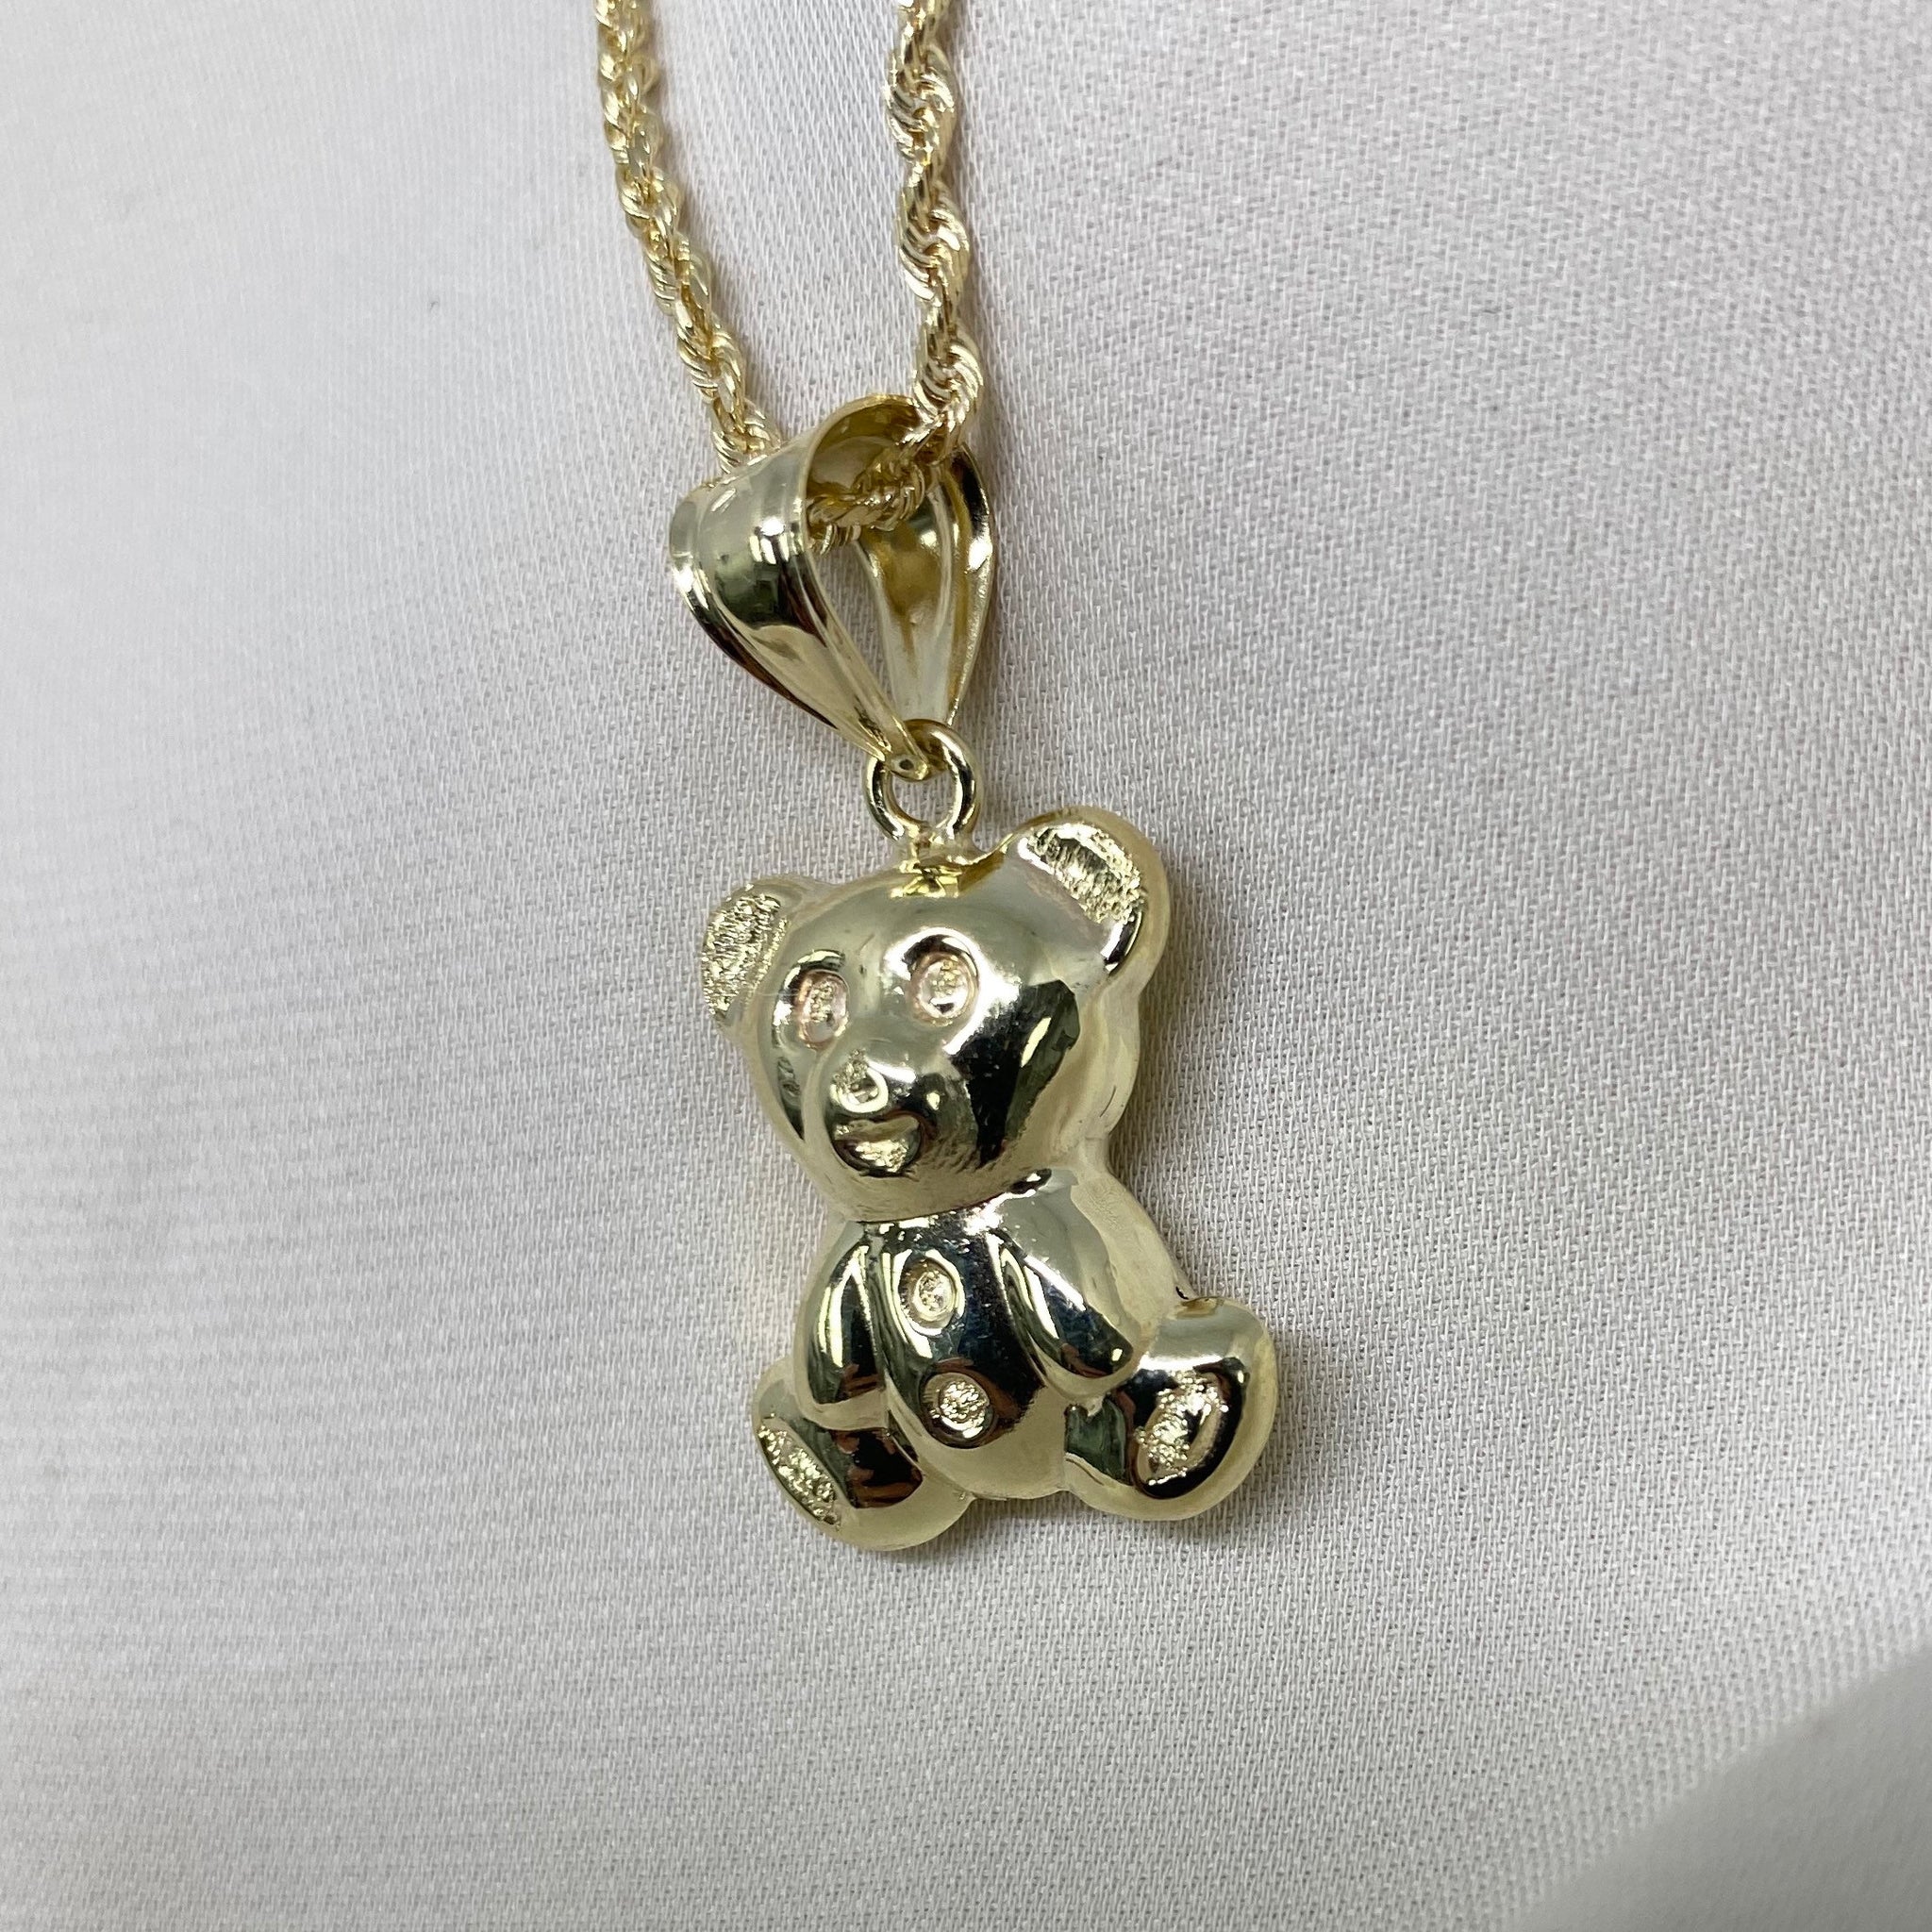 Gold Personalized Name Heart I Love You Teddy Bear Charm Pendant Necklace (Yellow/Rose/White)